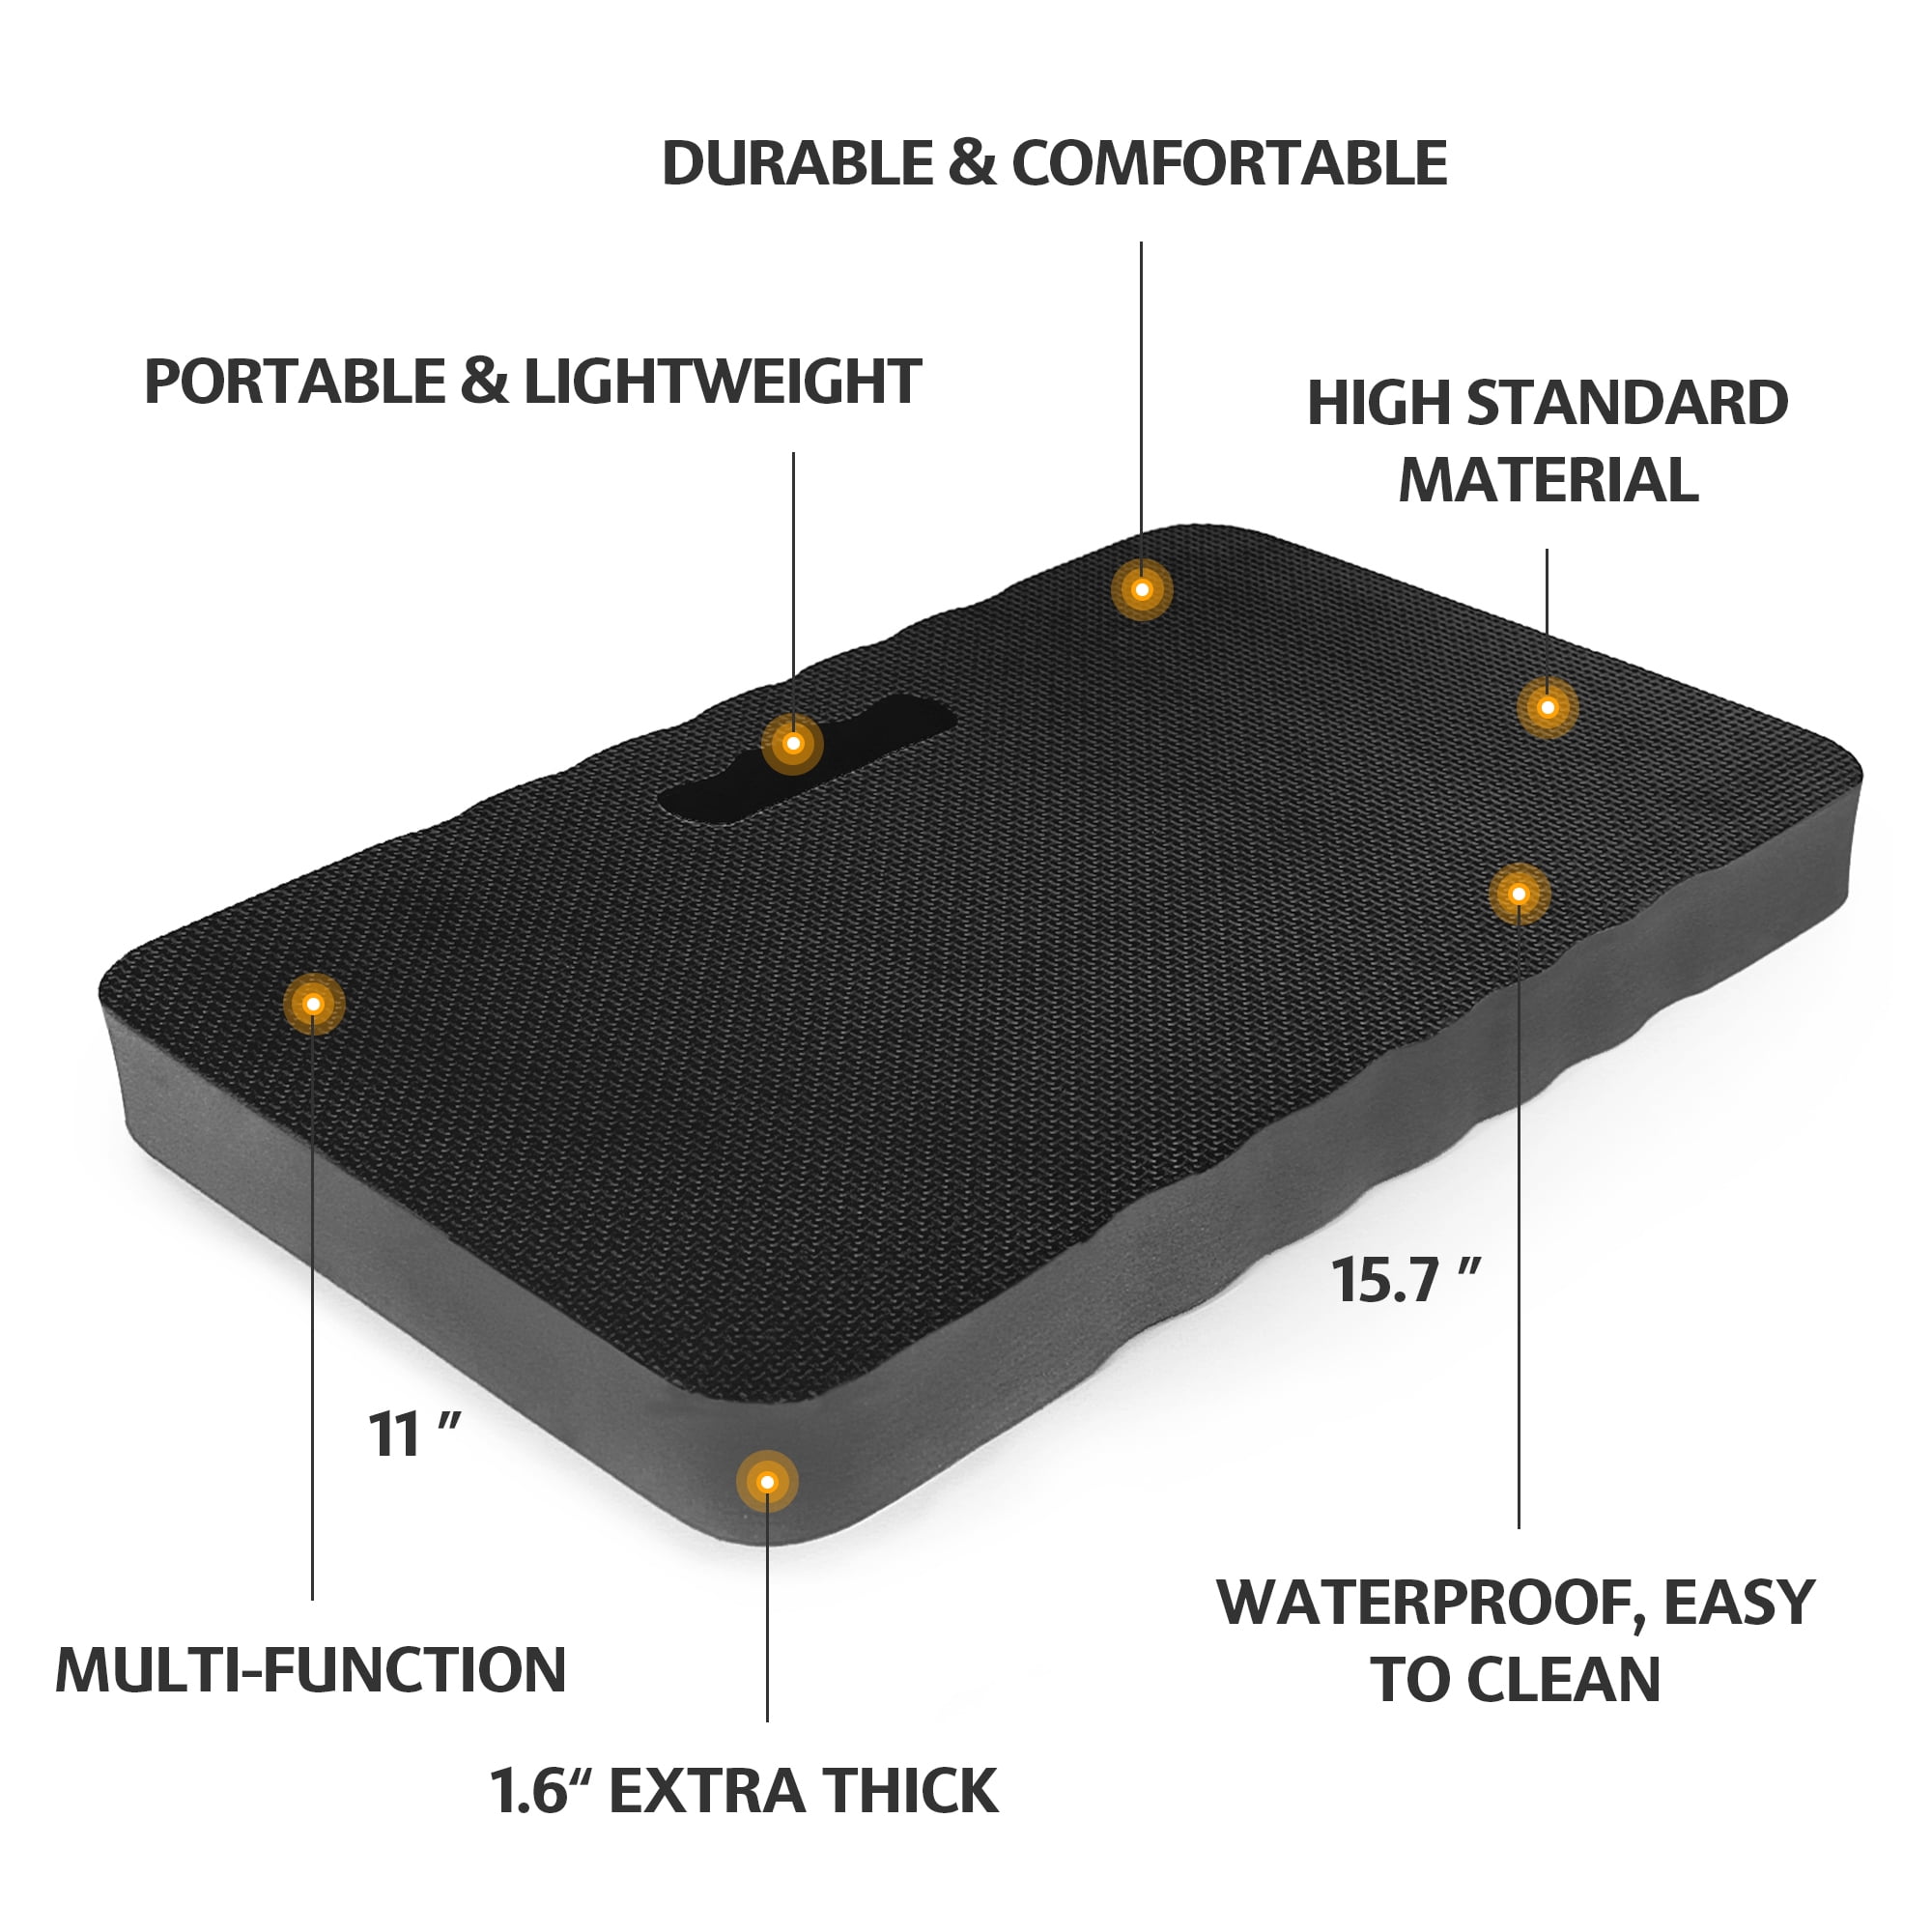 PROPAD ® Premium Extra Thick Kneeling Pad, 1.5 Inch Thick